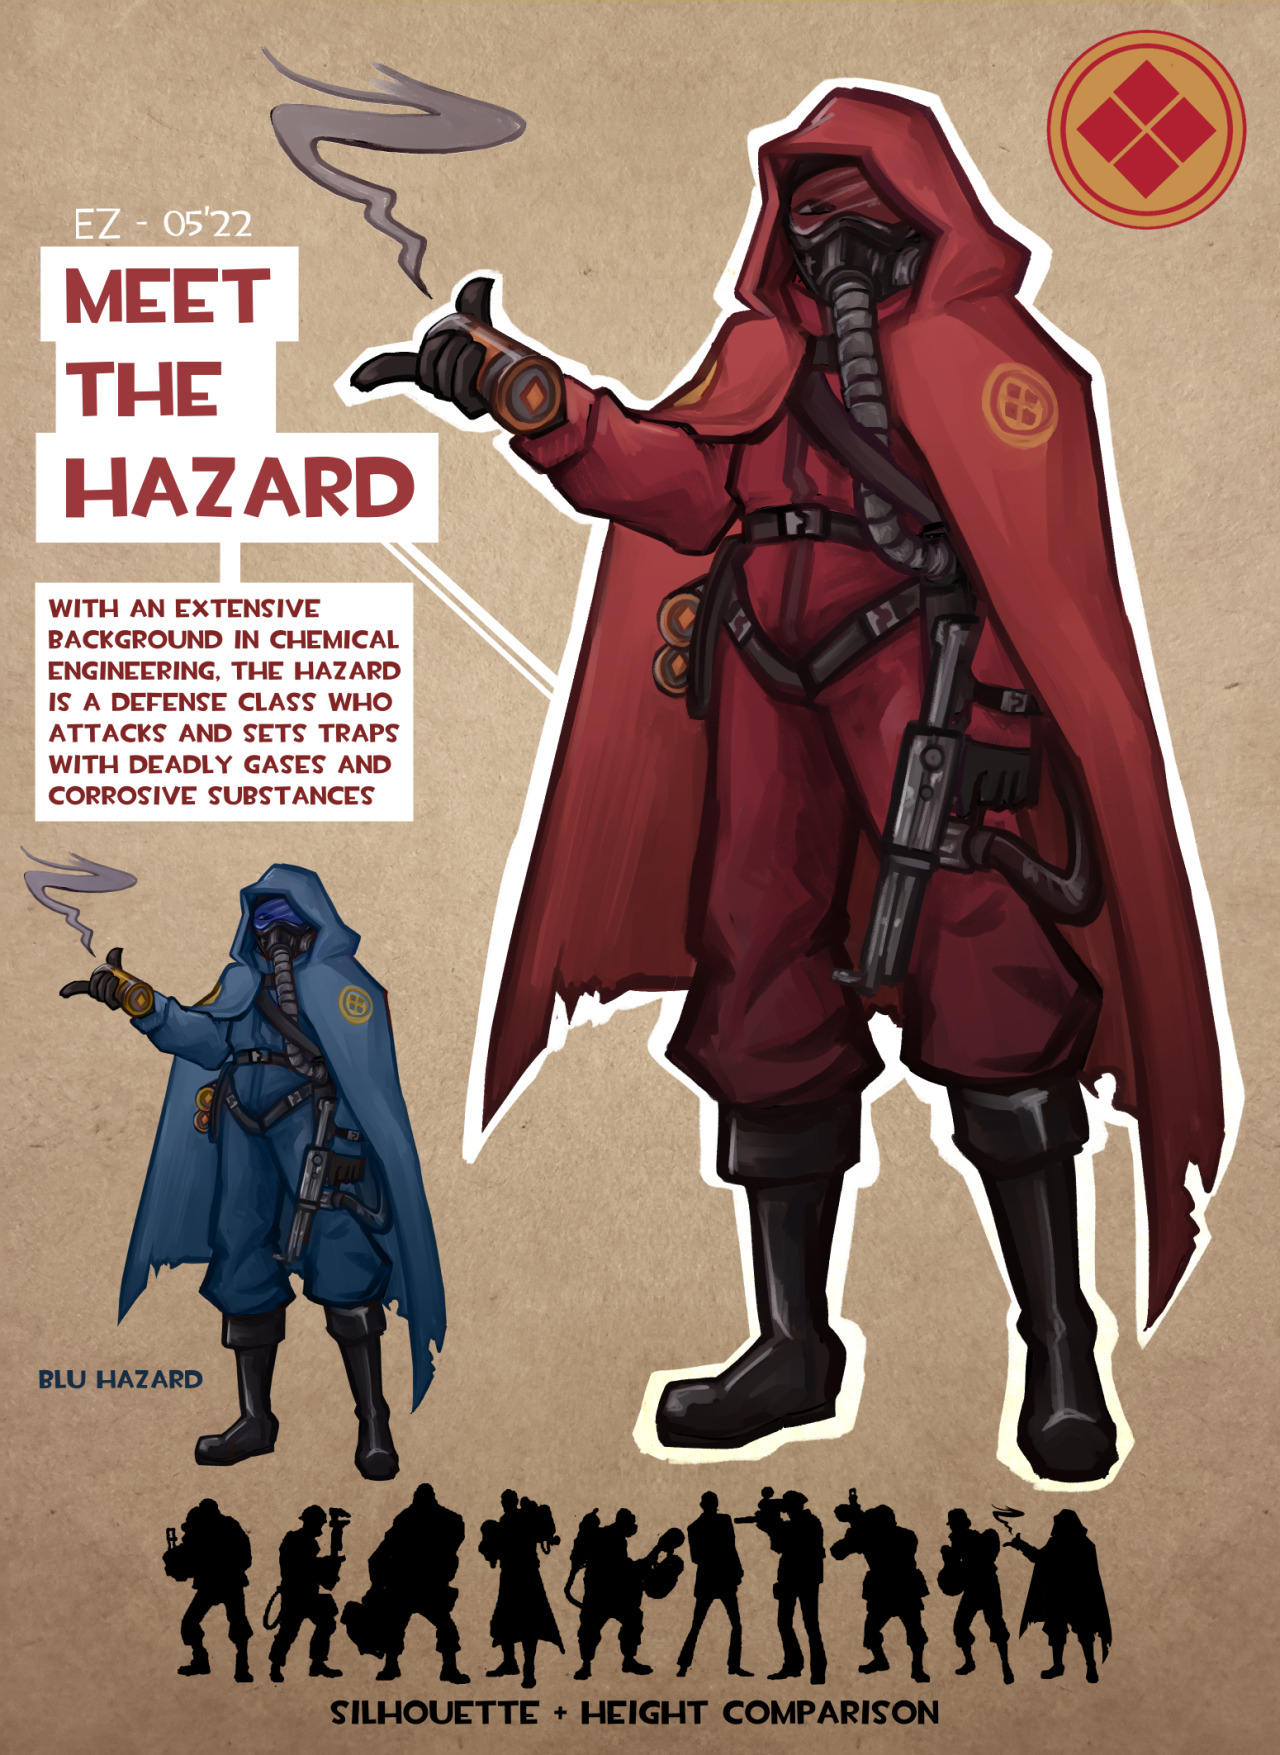 been wanting to make a chemistry based tenth class for a while now, meet the Hazard! The Hazard is a defense class who uses chemical weapons. Their primary, a homemade gun that shoots corrosive substances, can be used to damage an enemy directly or set up traps in the environment that deal damage when it comes in contact with an enemy. Their secondary gas grenades work in a similar fashion, but they have a greater area of effect; although the Hazard cannot carry many grenades at a time, their effects last longer as traps than their primary!In their free time, the Hazard can usually be found in their workshop checking and double-checking their equipment, and triple-checking just in case; for someone who likes to mess around with dangerous chemicals, they’re a huge stickler for safety.They tend to be quite timid and keep to themselves off the battlefield, but they aren’t exactly hostile, it’s just a bit awkward for them. When they talk with the mask on, their speech, although heavily muffled, is mostly able to be understood (unlike a certain pyromaniac...) #tf2 #team fortress 2 #oc#tenth class#10th class#tf2 oc #tf2 tenth class #my art#digital #they may also be friends with a nuclear physicist who i may also made as another tenth class design o__o  #also idk much about the melee i just assume they kick the person in front of them or something lol  #tf2 10th class  #team fortress 2 oc #tf2 hazard